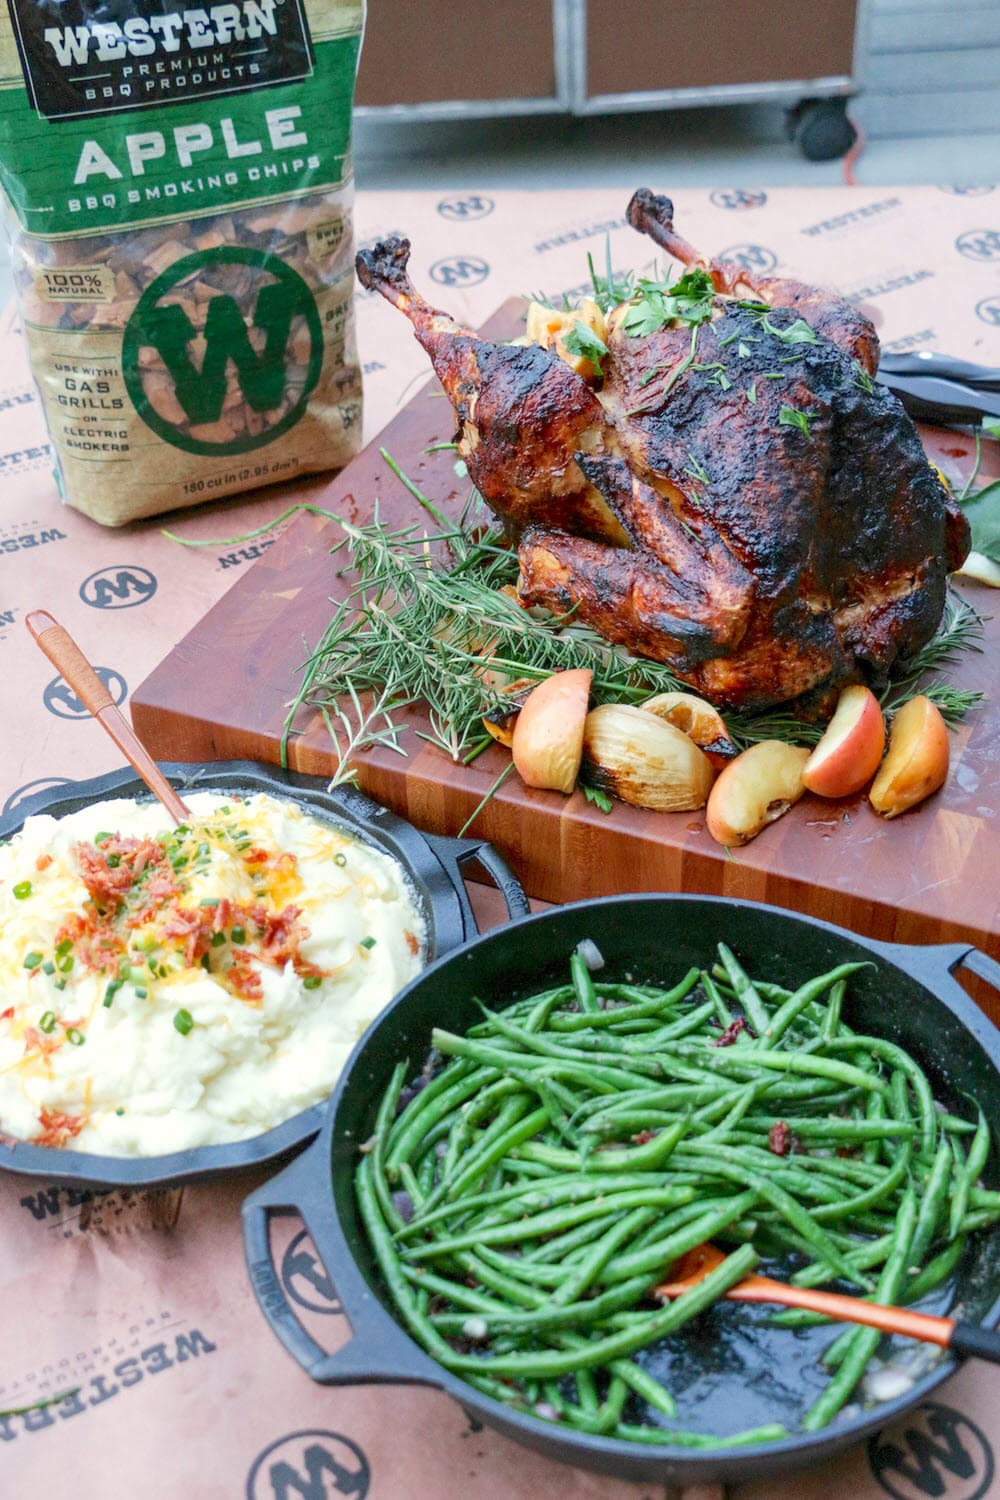 Rotisserie smoked turkey with green beans, mashed potatoes and bag of Western Apple Smoking Chips